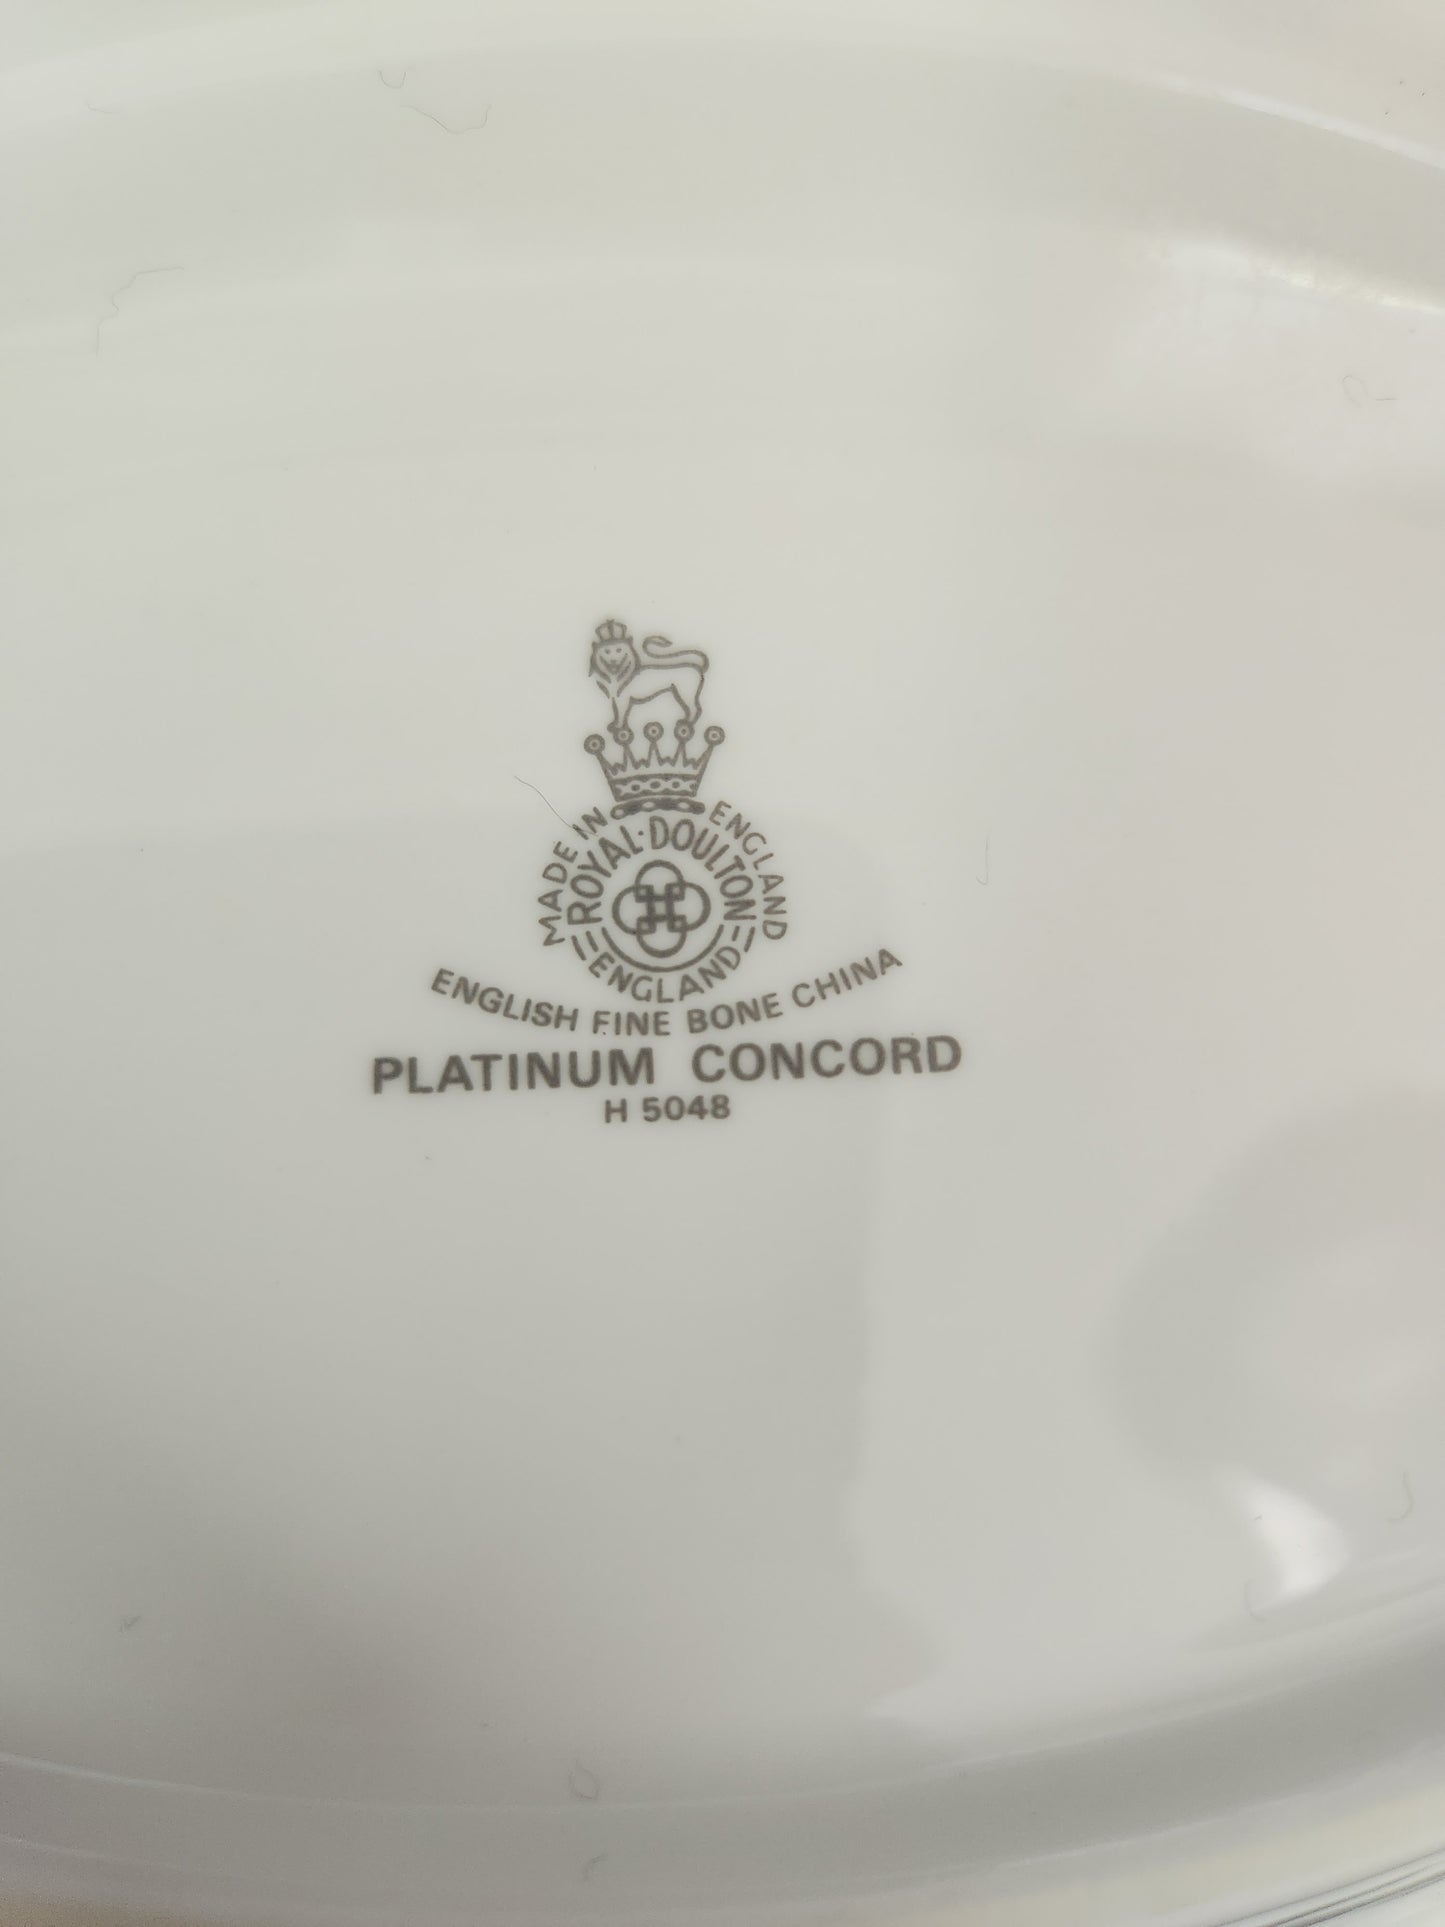 Concord Platinum 11" Oval Vegetable Bowl w/Lid by Royal Doulton - #H5048